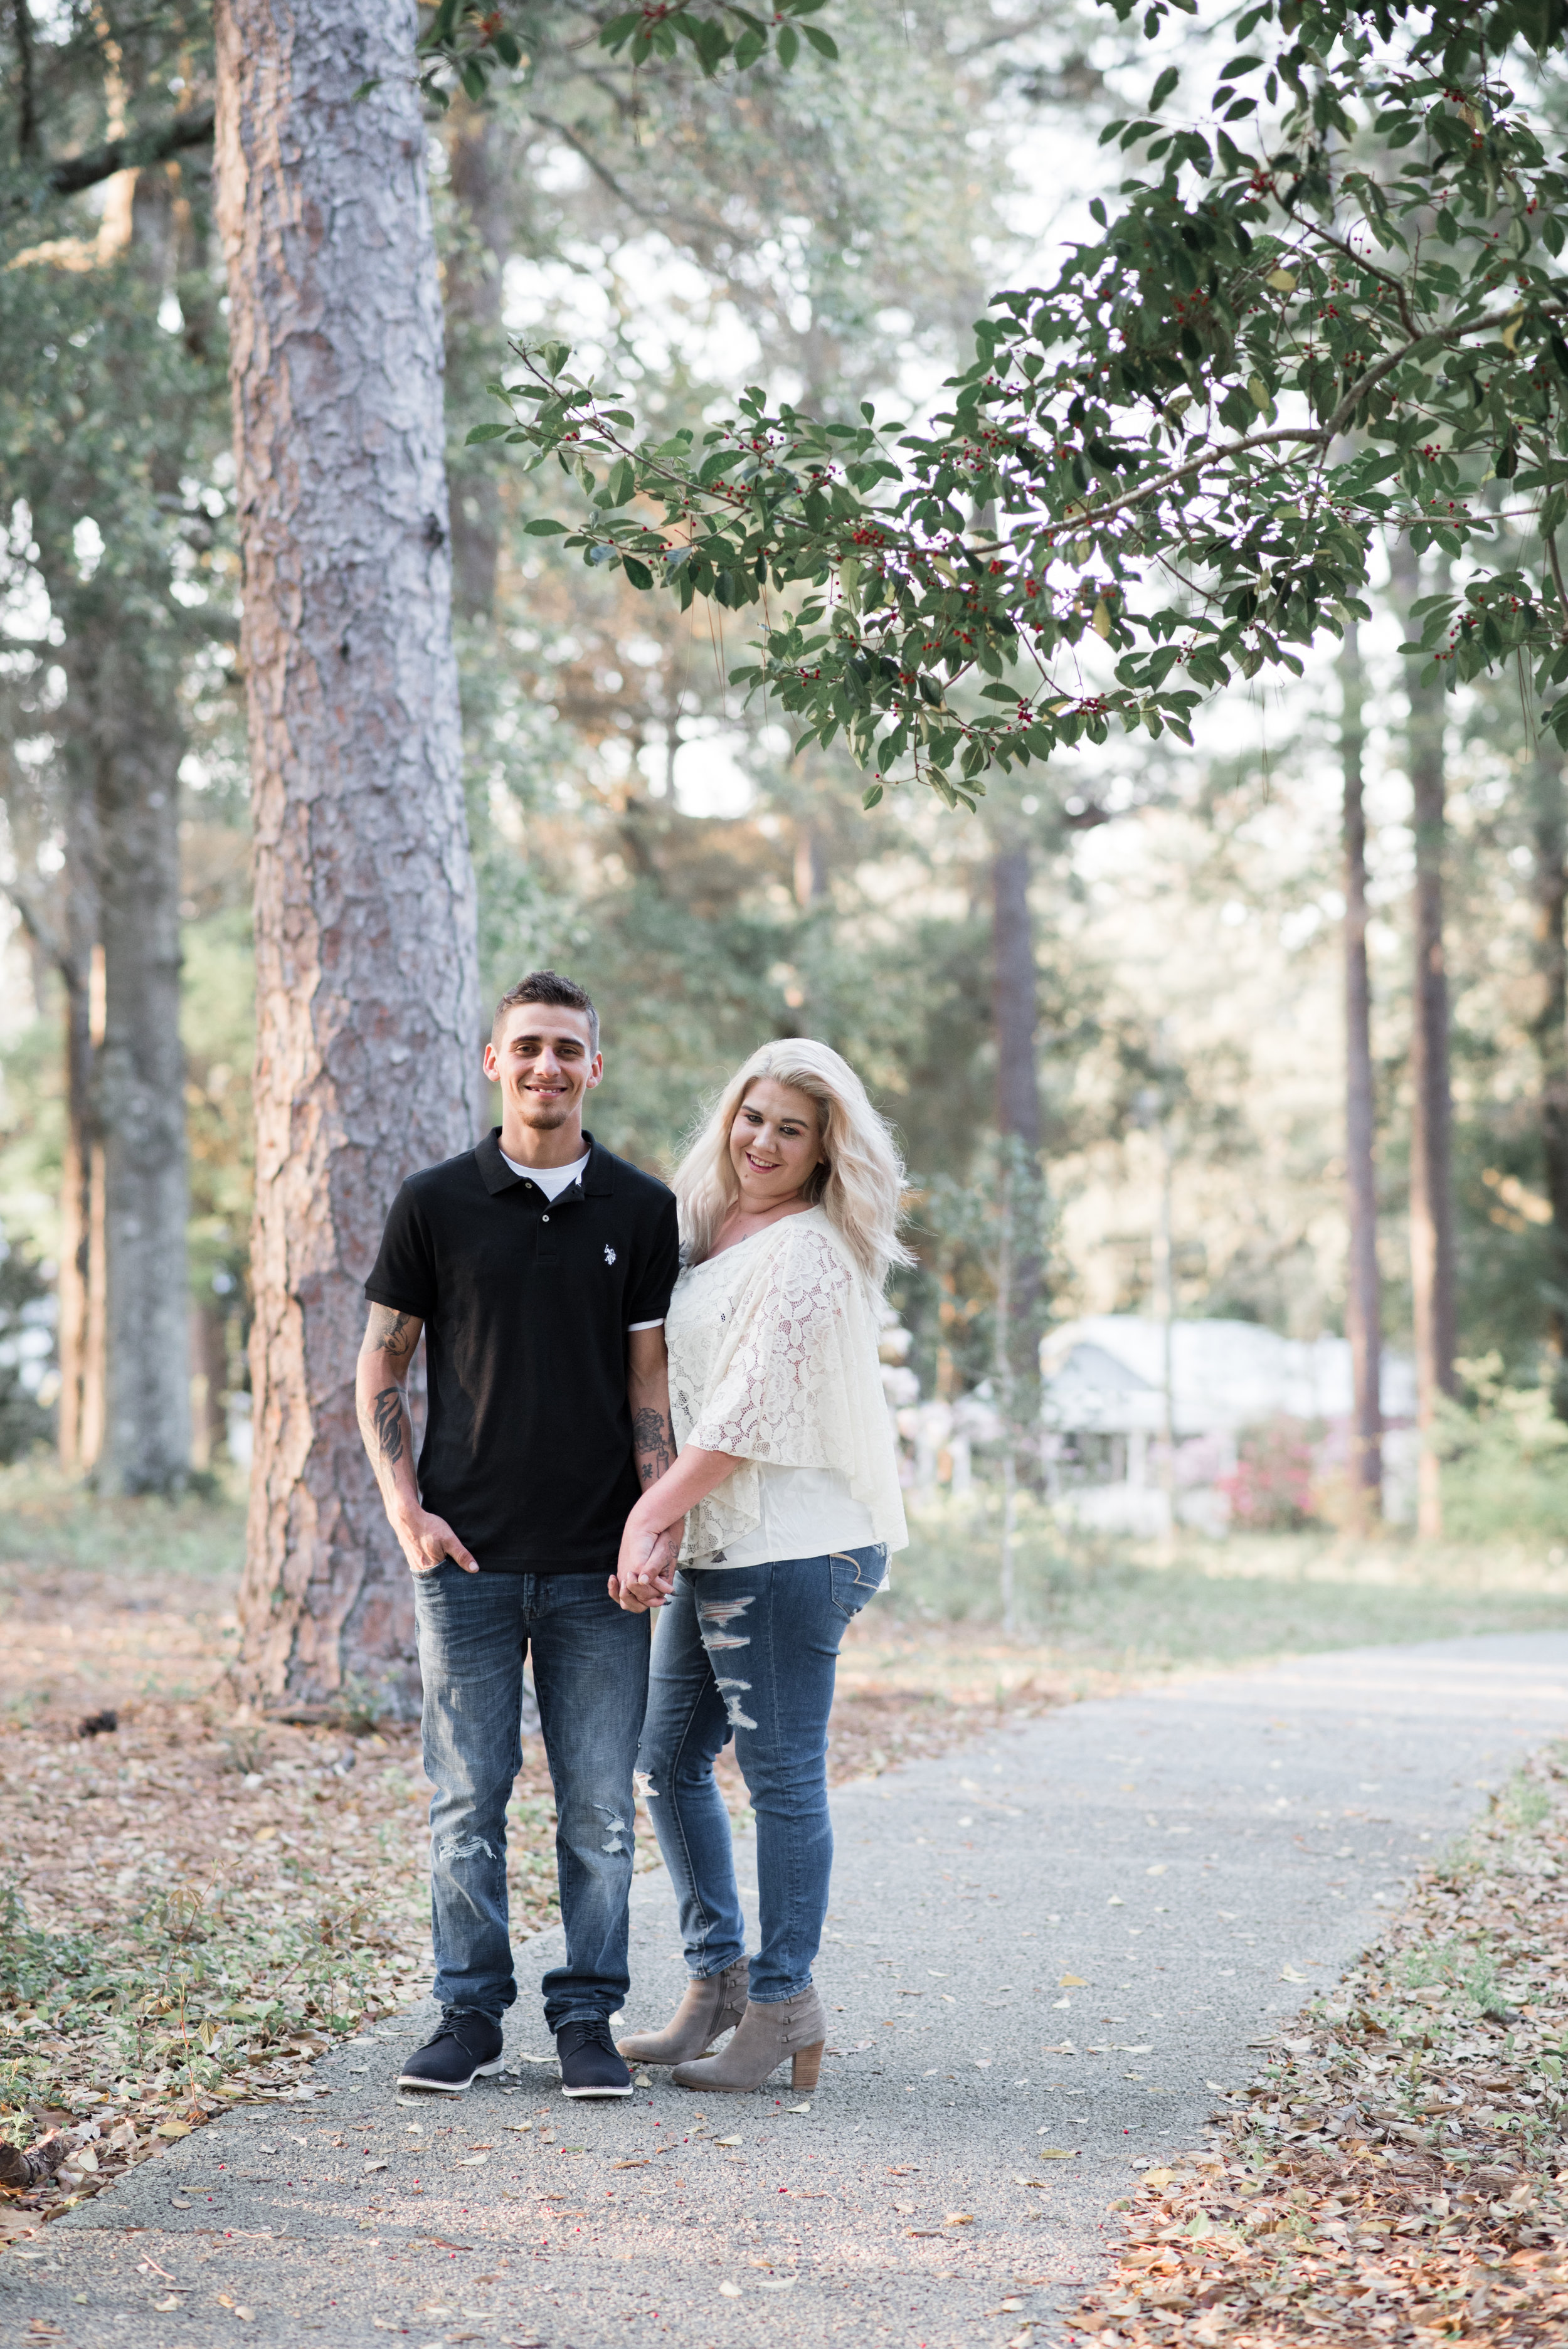 Downtown Fairhope Family Photoshoot by Kristen Grubb Photography